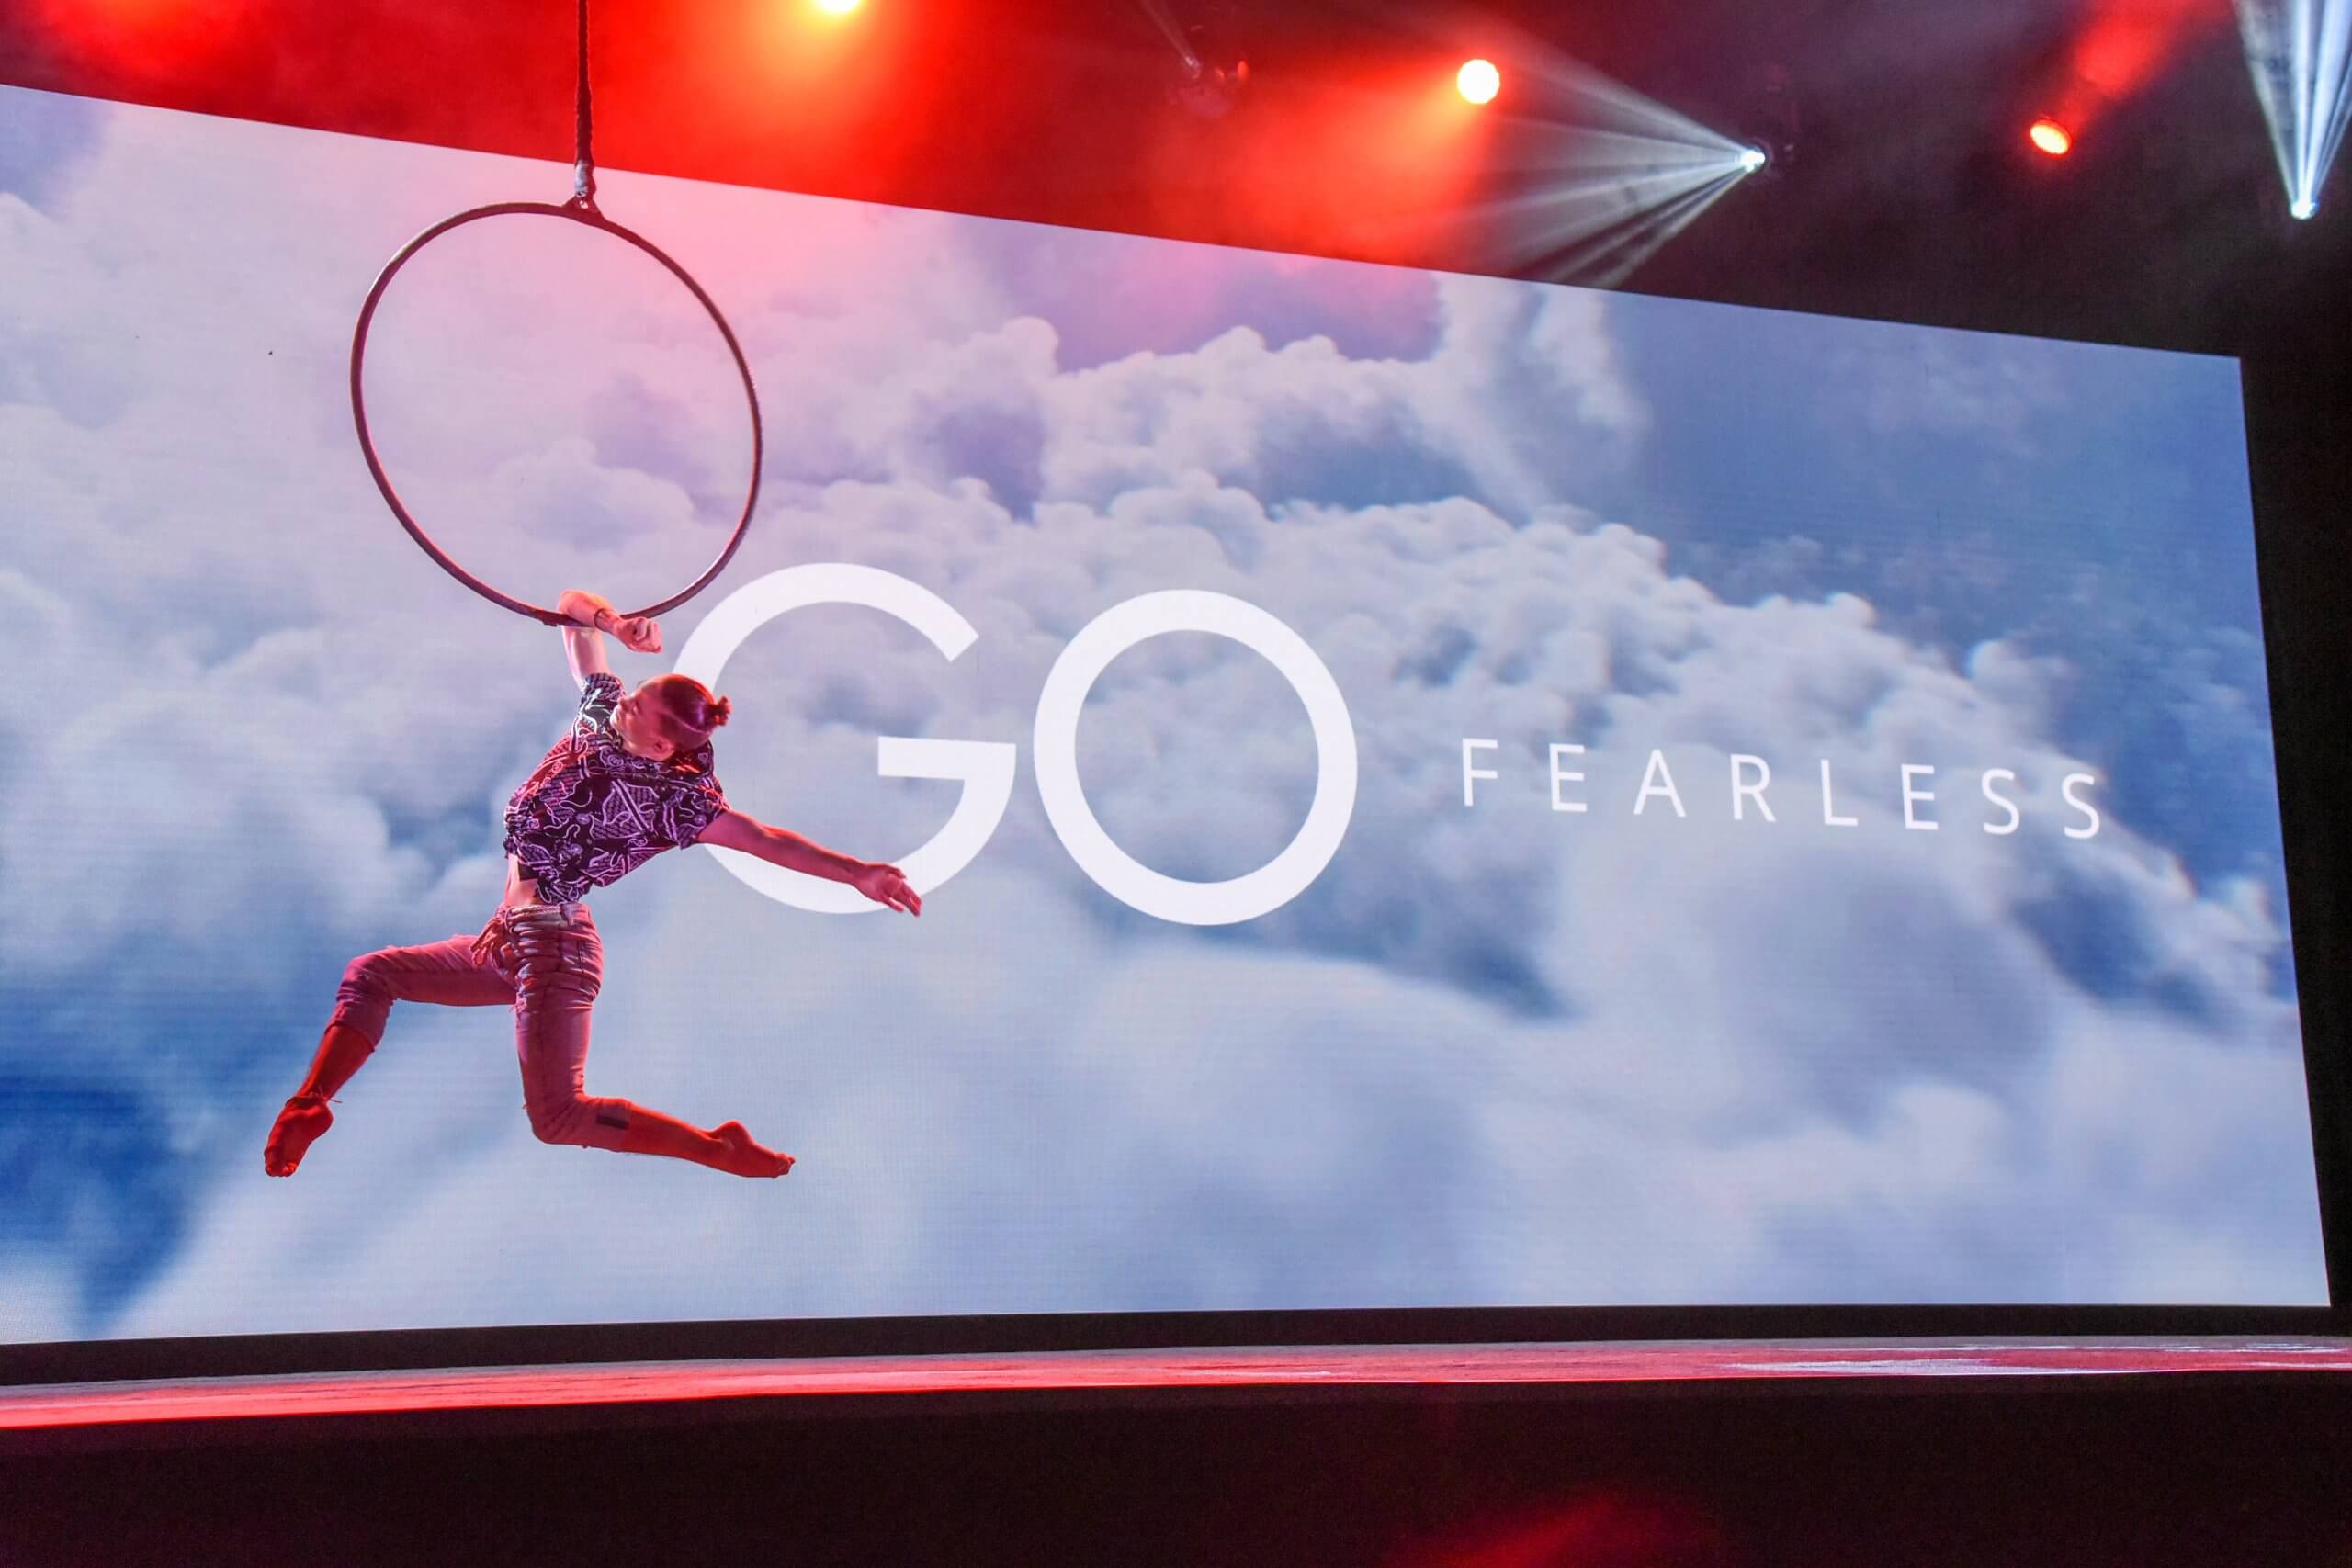 Screen displaying "Go Fearless"